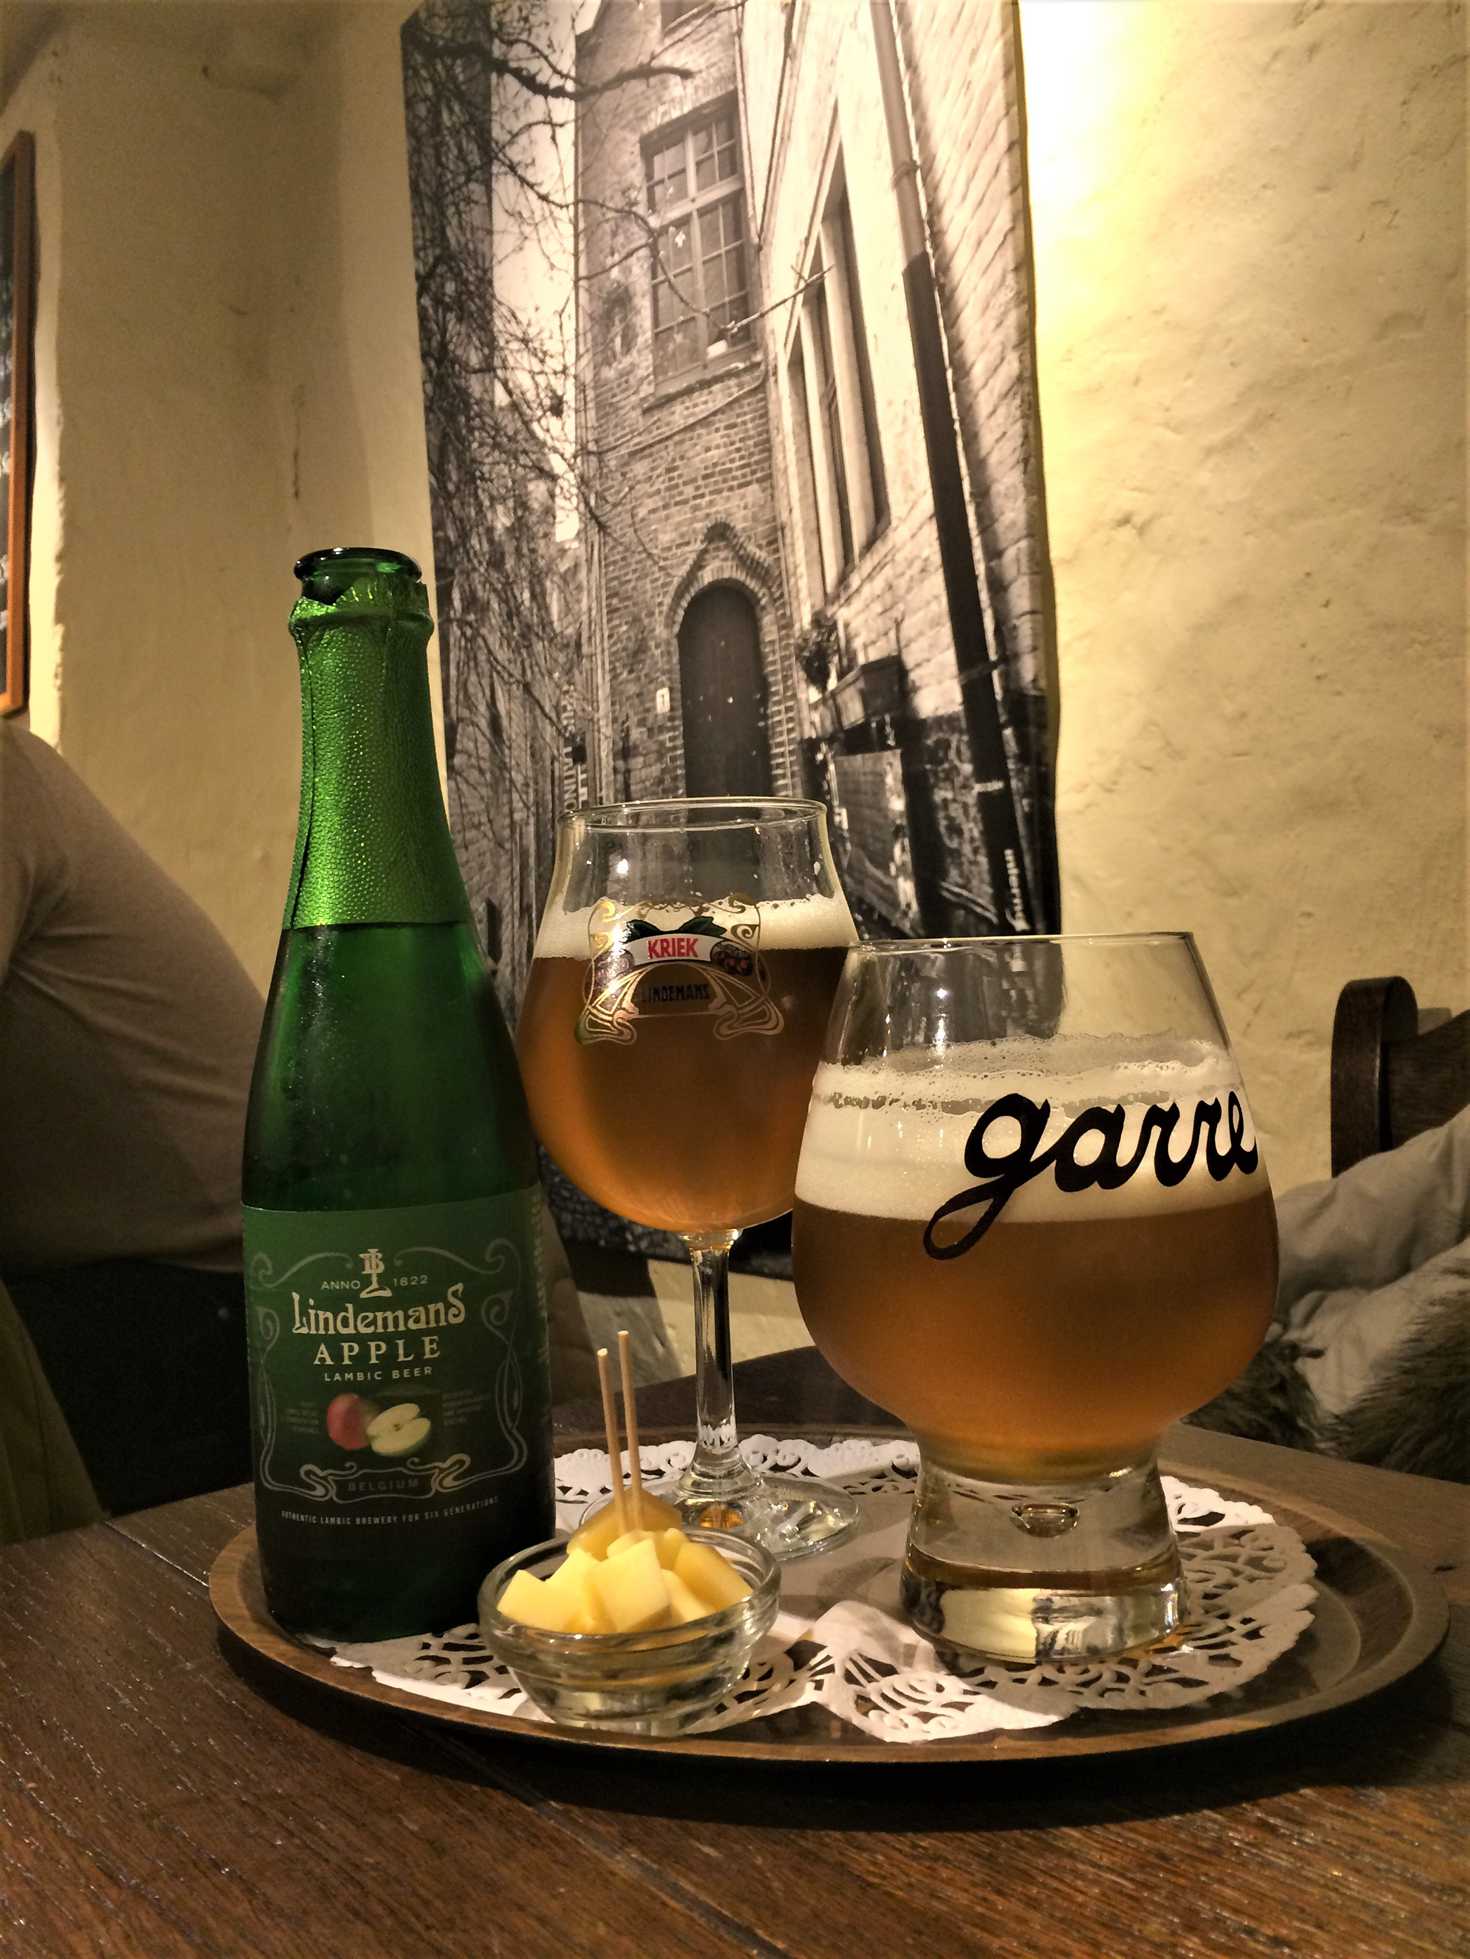 A picture of two glasses of beer, a bottle of lindman's apple lambic beer, and a small dish filled with cubed cheese.